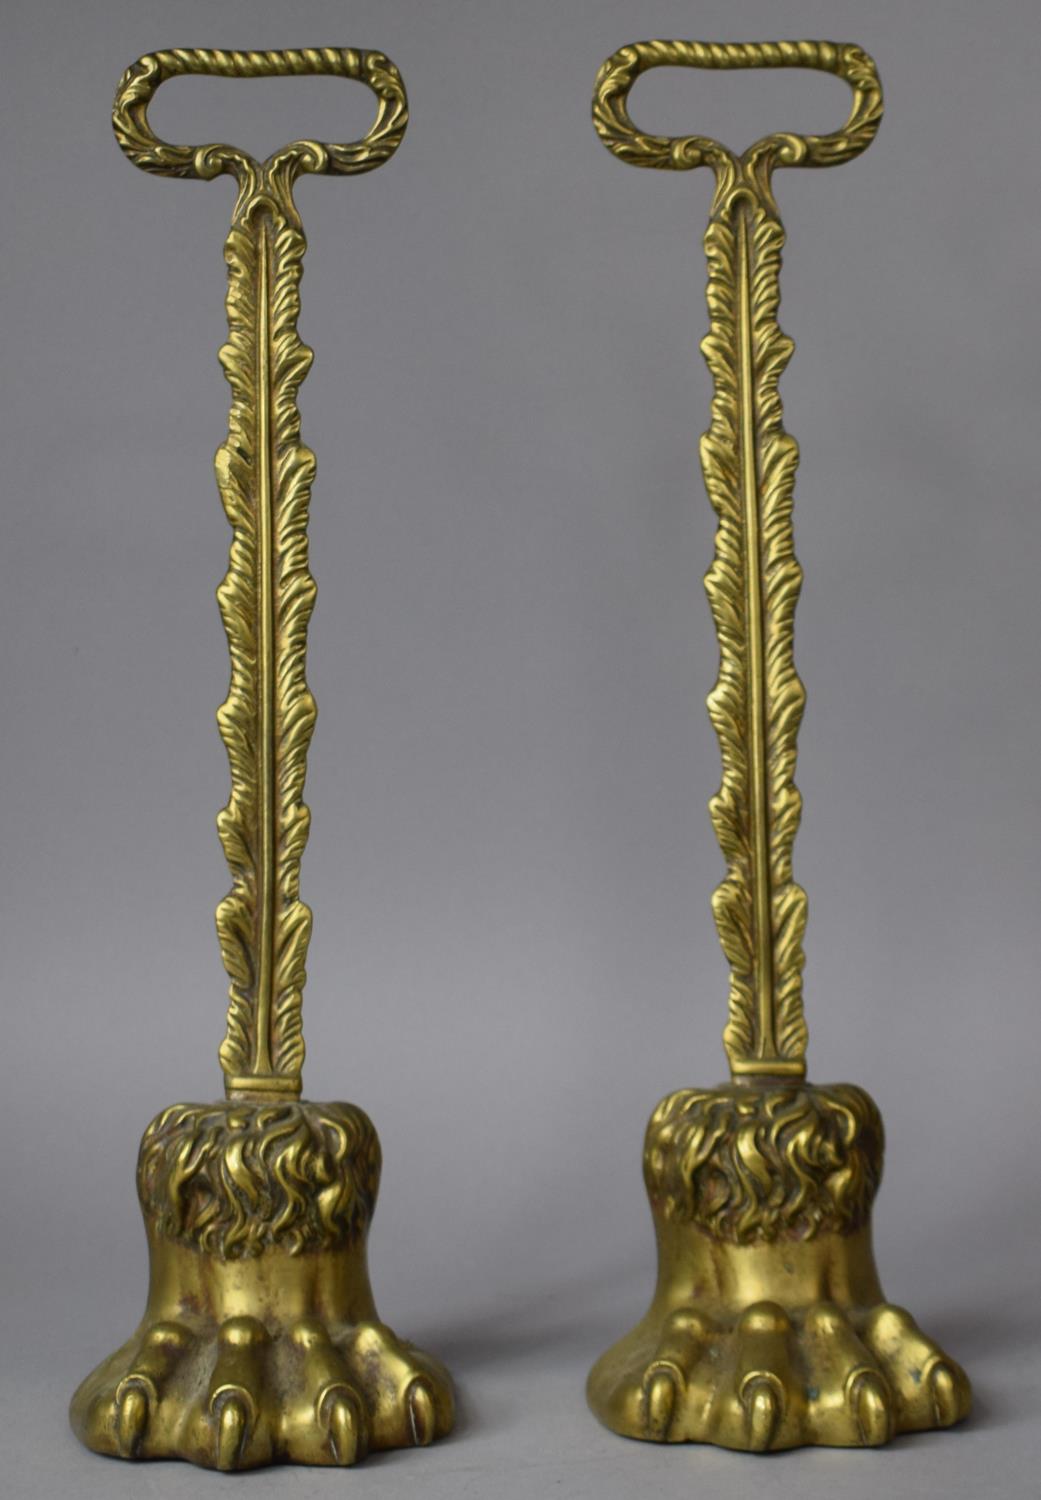 A Pair of 19th Century Style Lead Filled Brass Door Porters Having Claw Feet, 39cm High